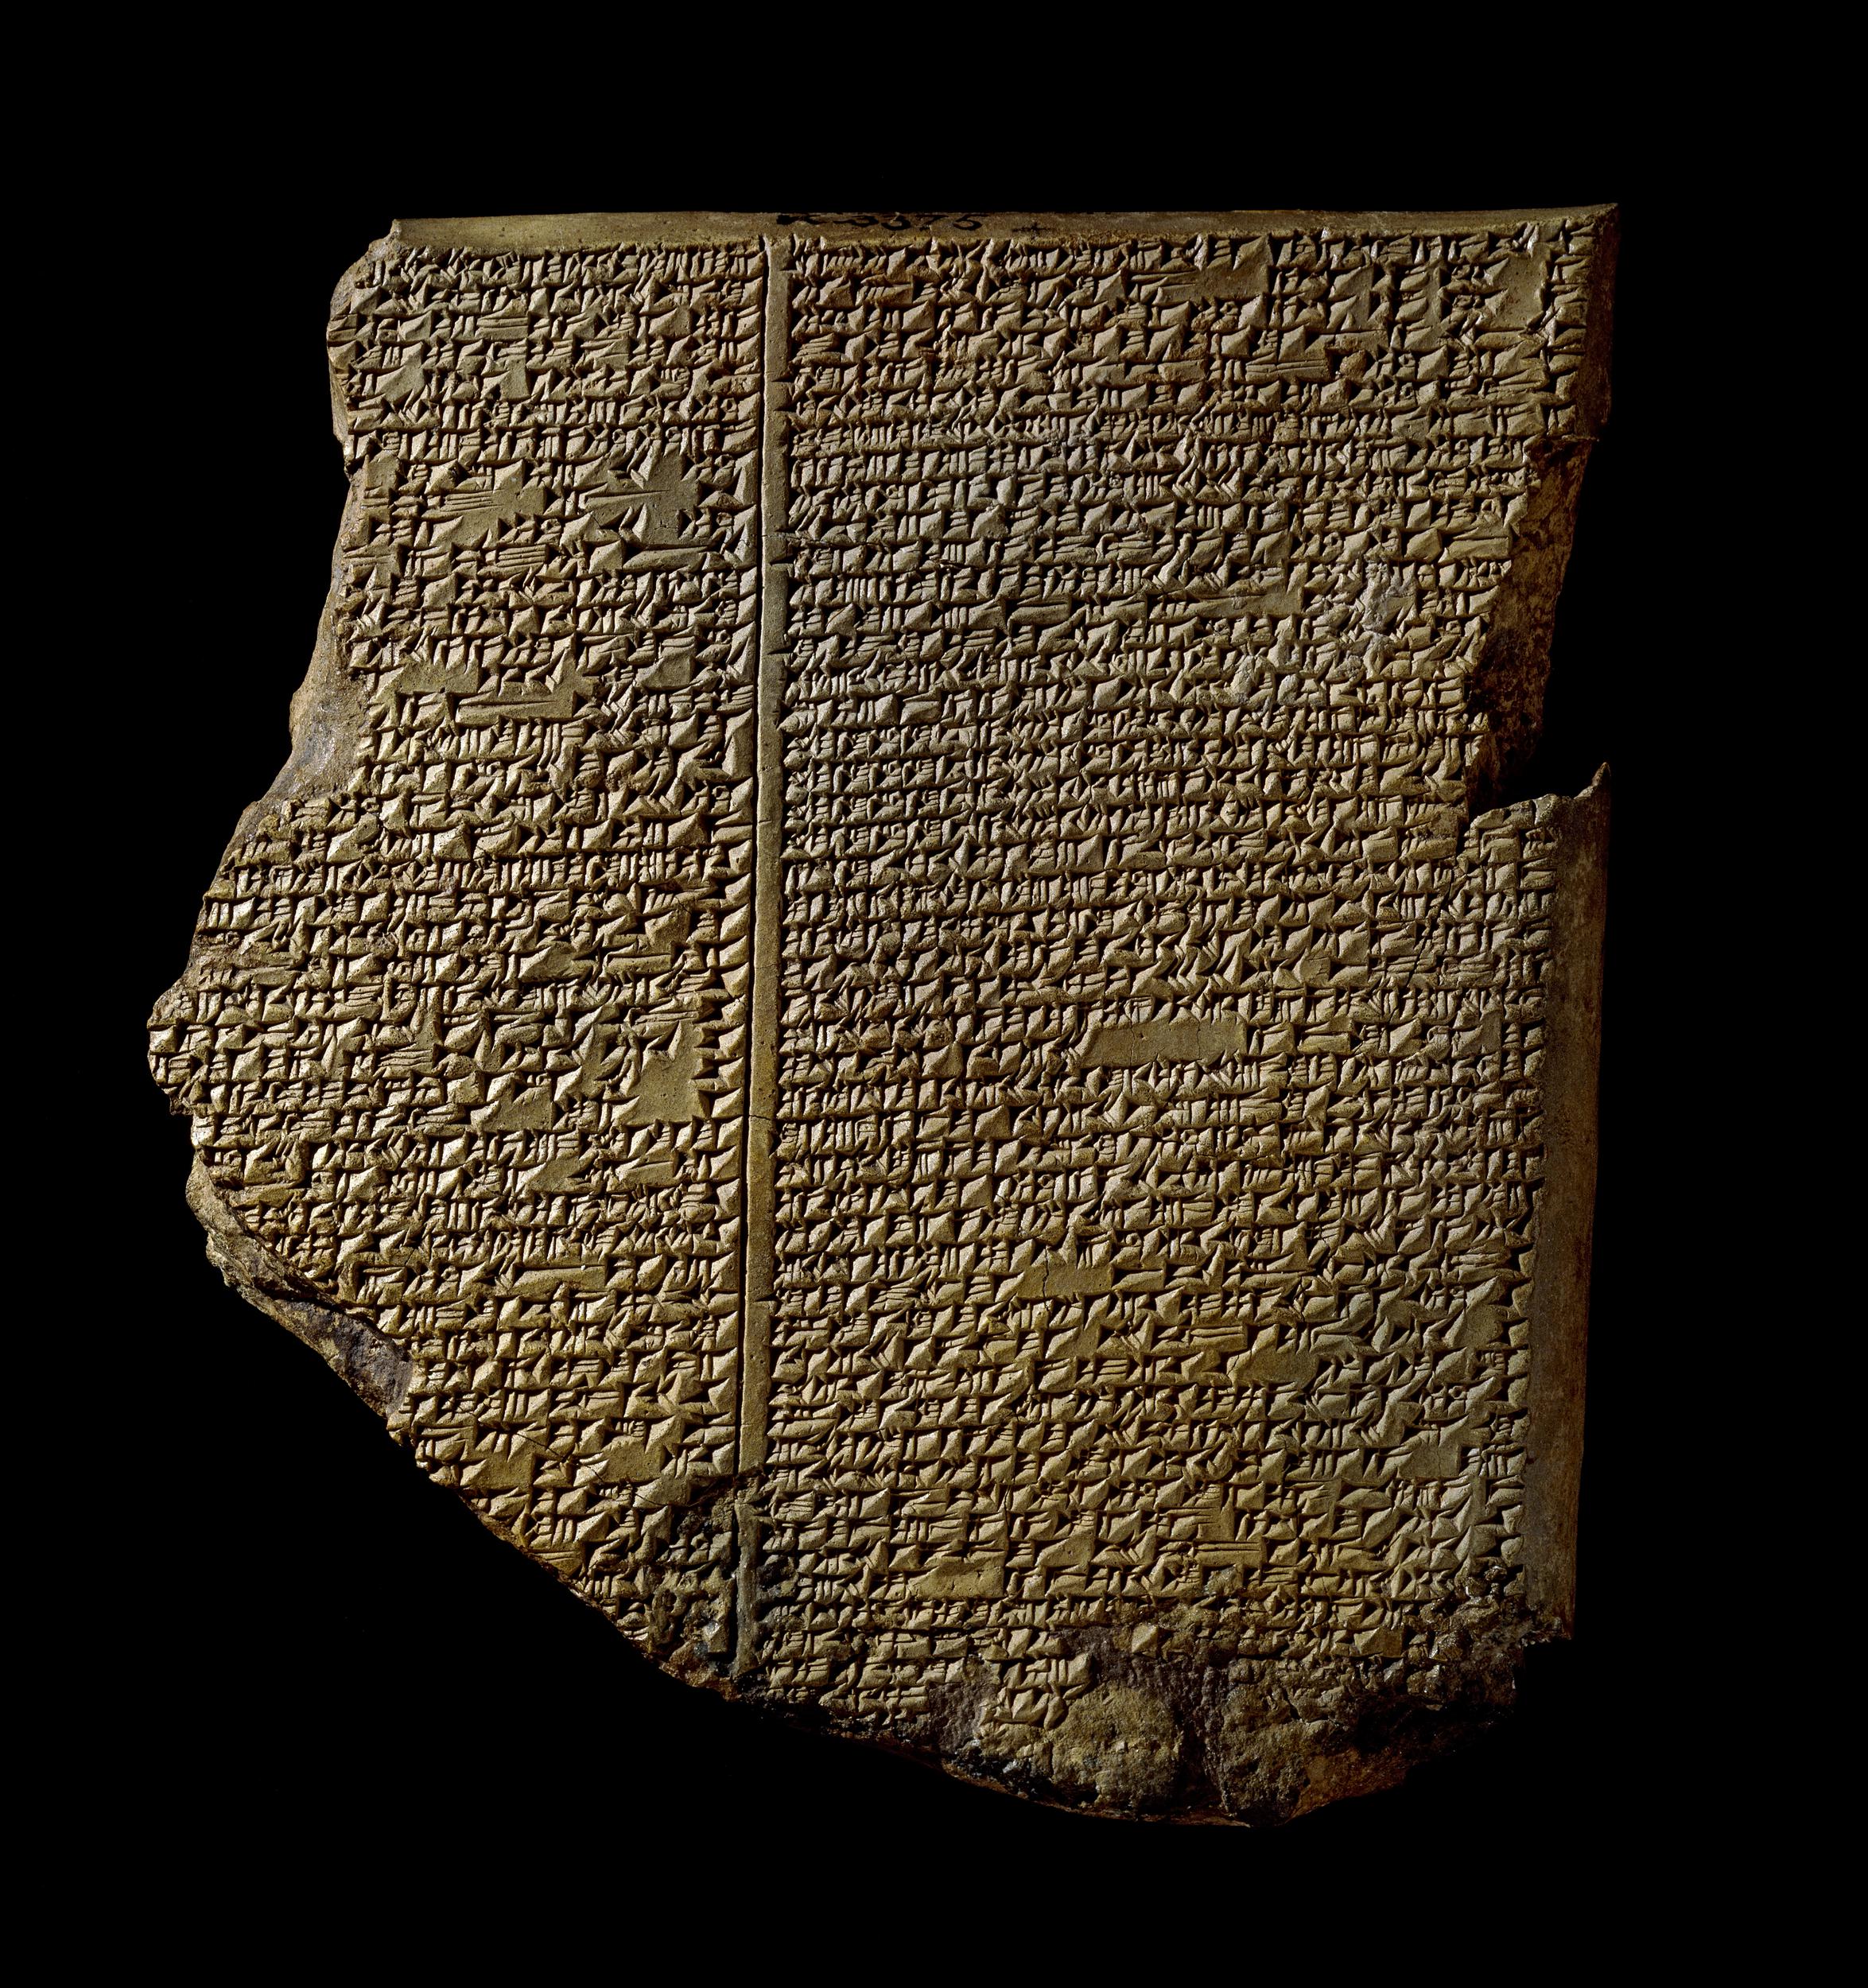 The Flood Tablet, part of the "Epic of Gilgamesh," 7th century B.C.E., Neo-Assyrian, 15.24 x 13.33 x 3.17 cm, from Nineveh, northern Iraq (© Trustees of the British Museum)